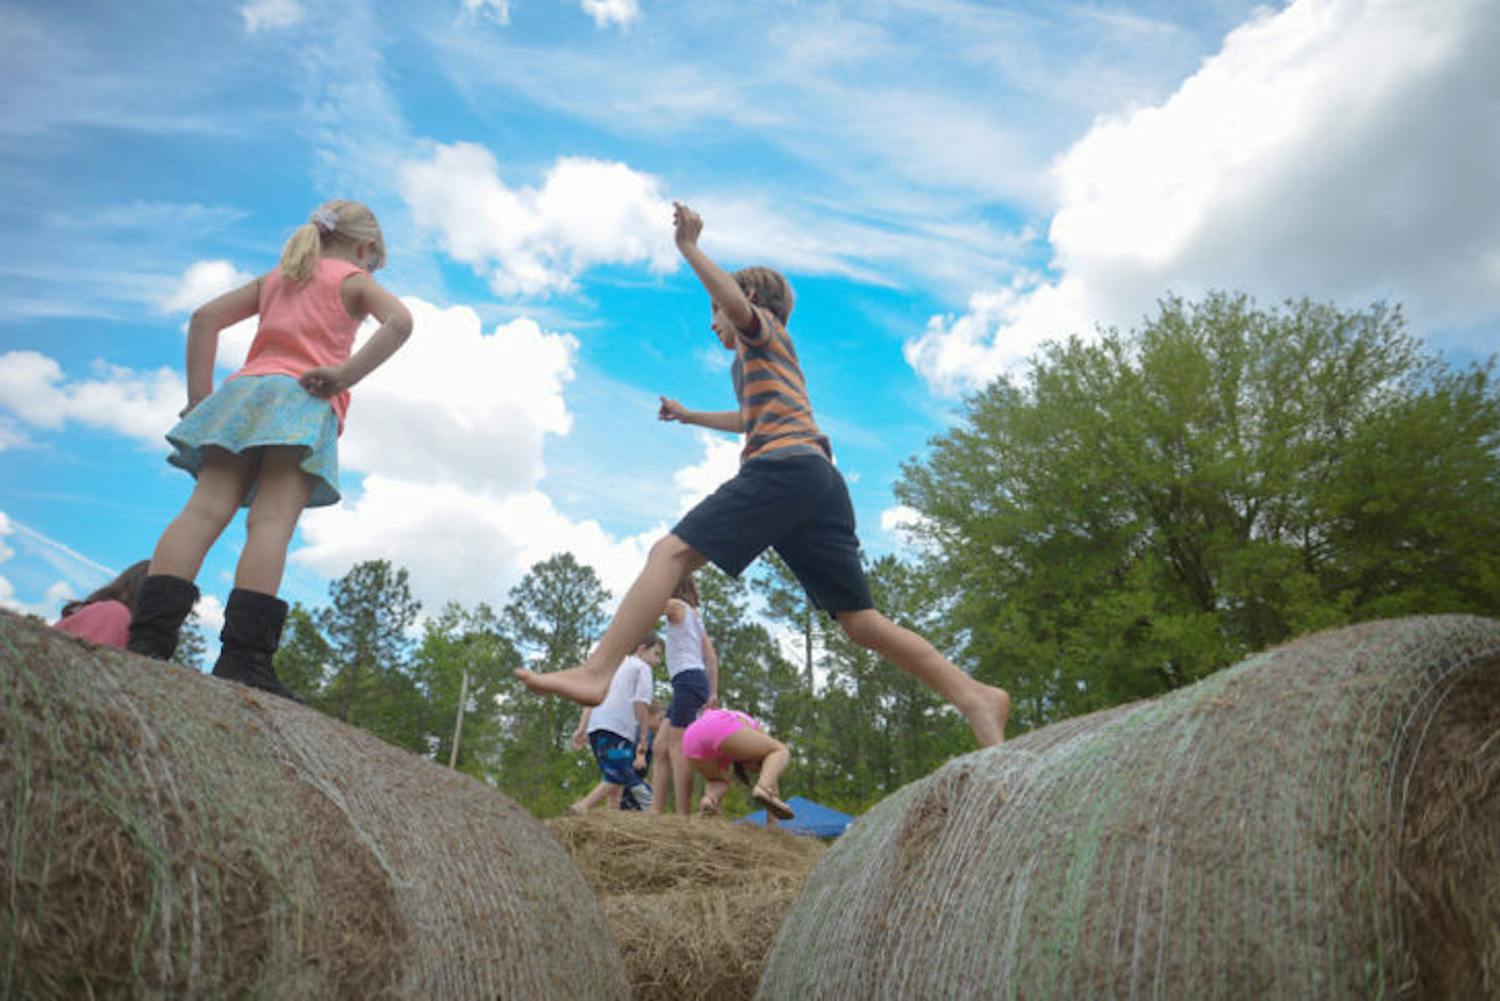 Kids play on hay bales at the fifth annual Swallowtail Country Fair on Saturday. The event, hosted at Swallowtail Farm north of Alachua, featured music, kids activities, workshops and demonstrations.